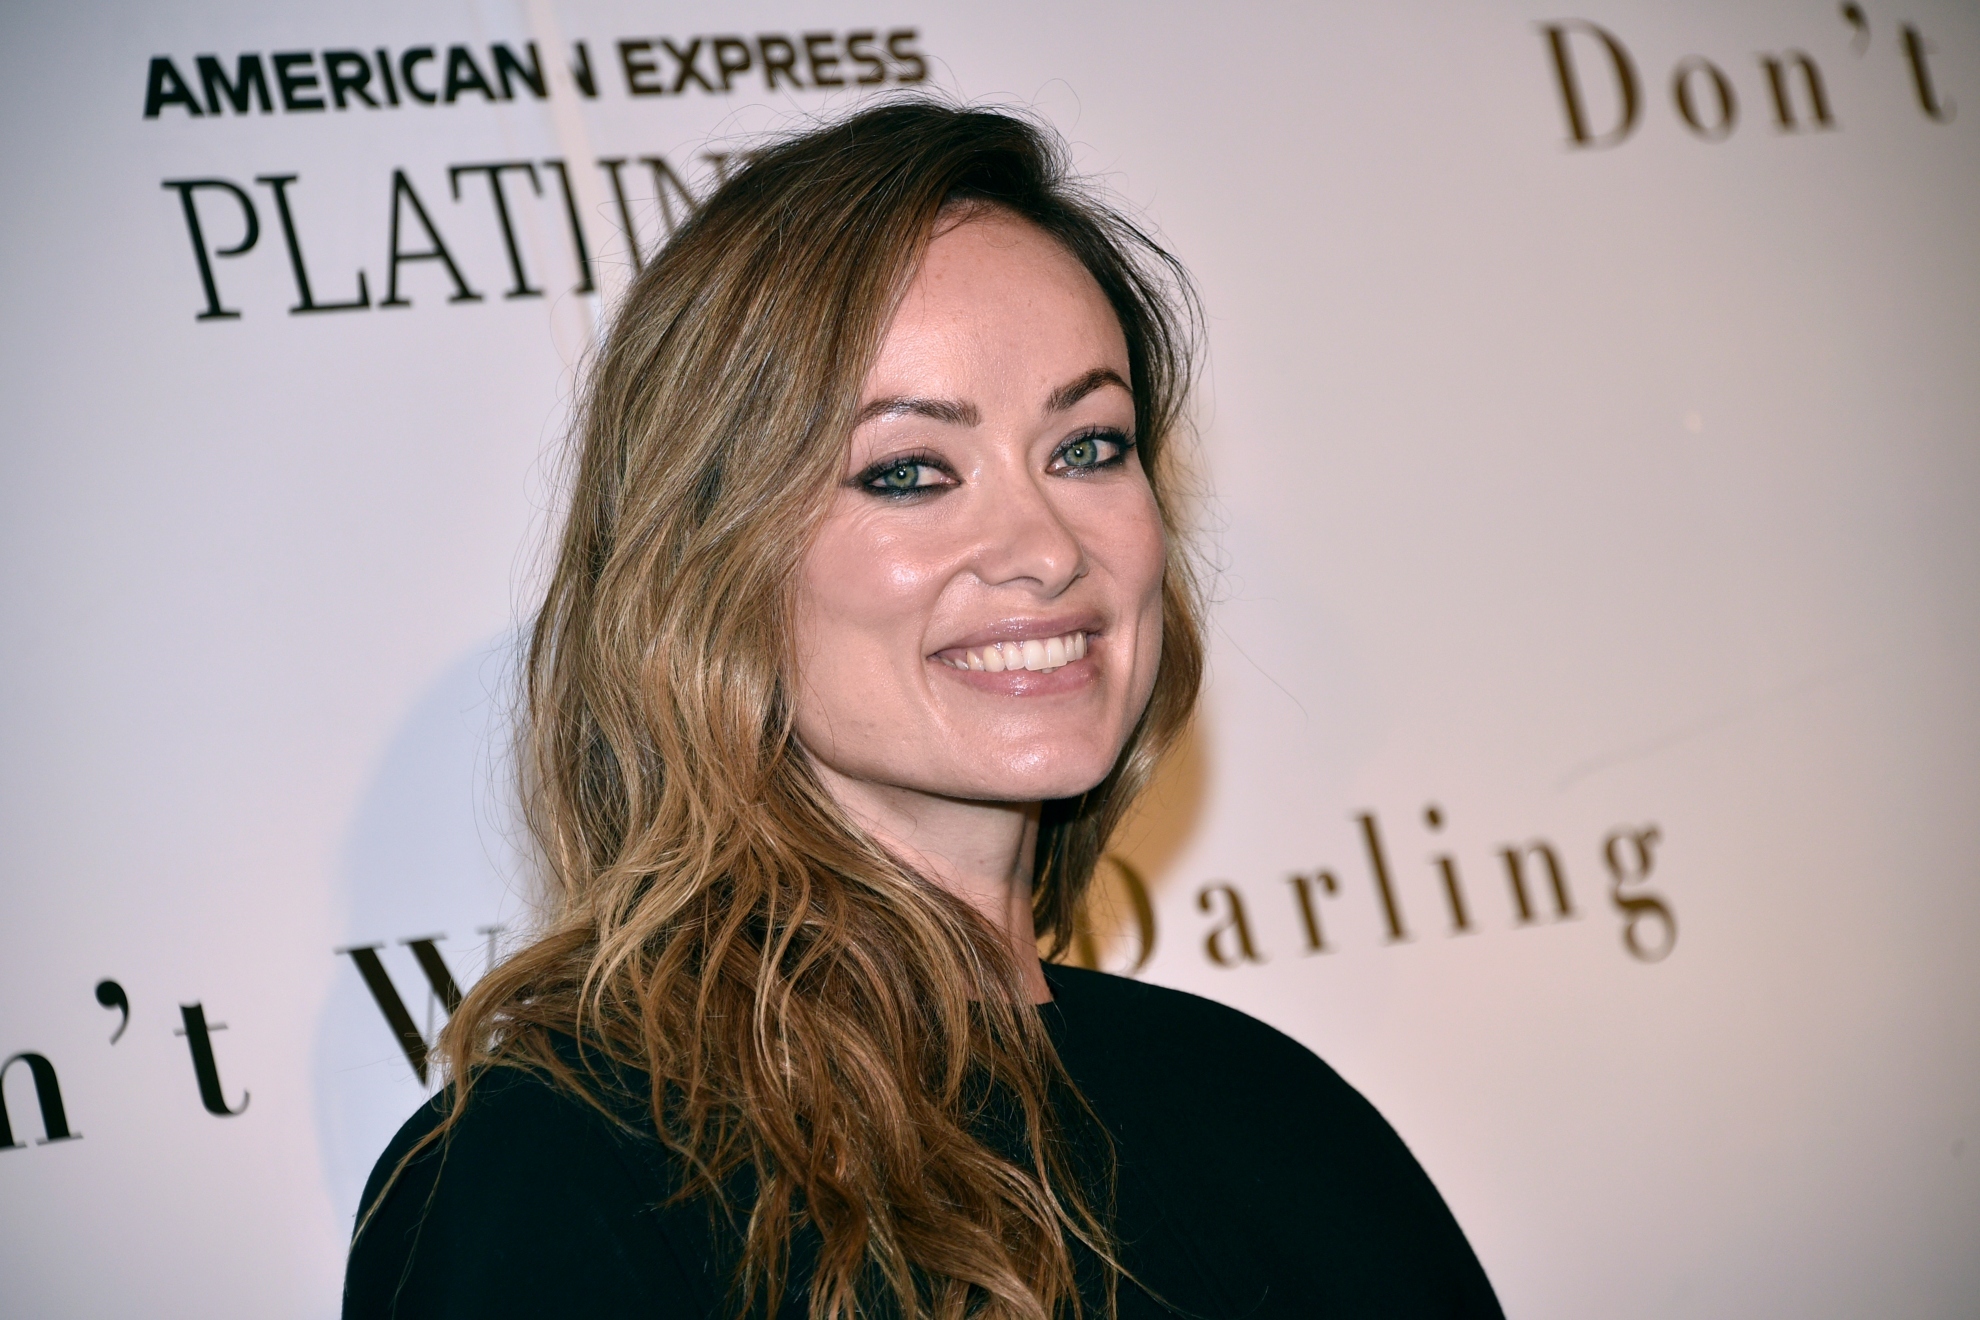 Olivia Wilde attends a special screening of "Don't Worry Darling" at AMC Lincoln Square on Monday, Sept. 19, 2022 / AP